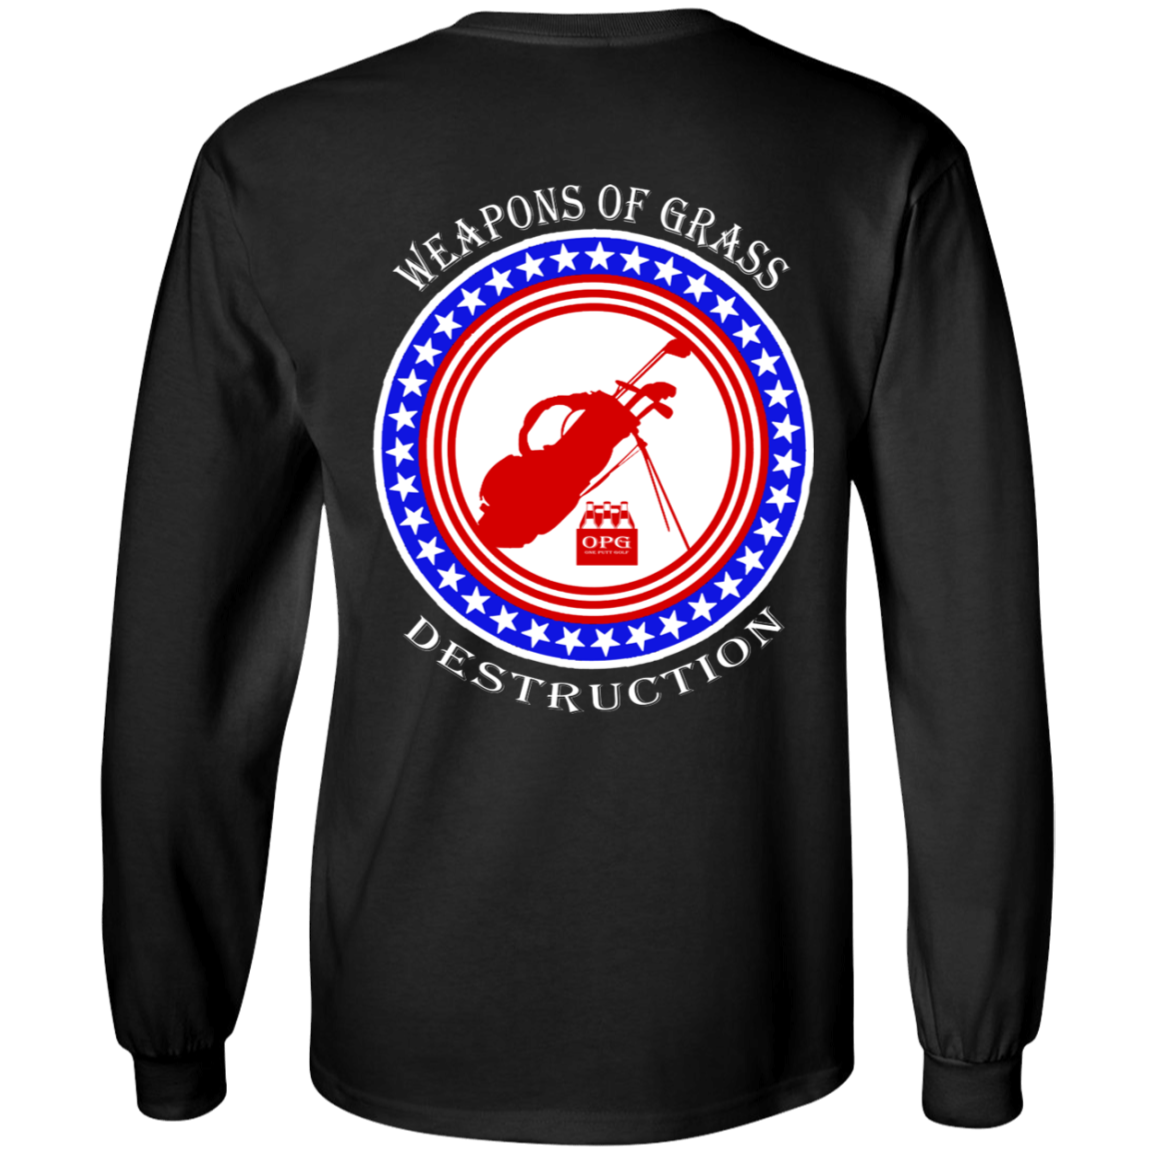 OPG Custom Design #18. Weapons of Grass Destruction. Youth Long Sleeve T-Shirt